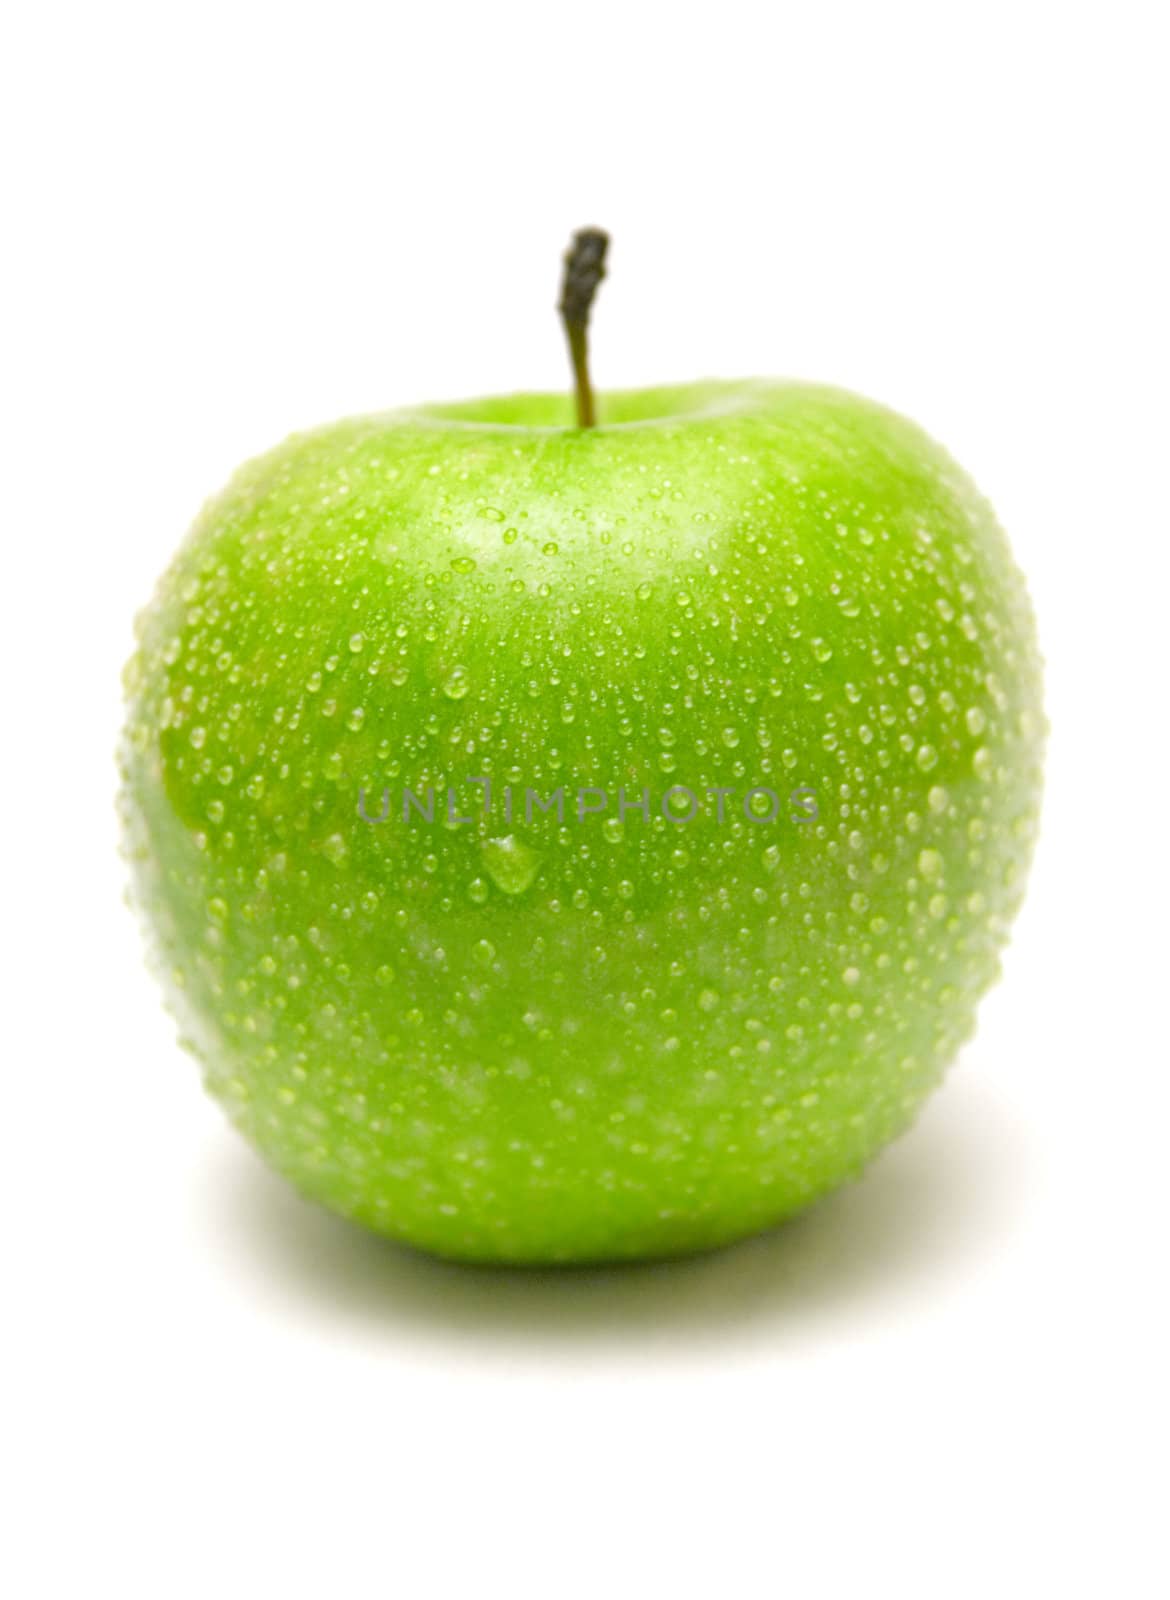 Single wet granny smith apple isolated on a white background.